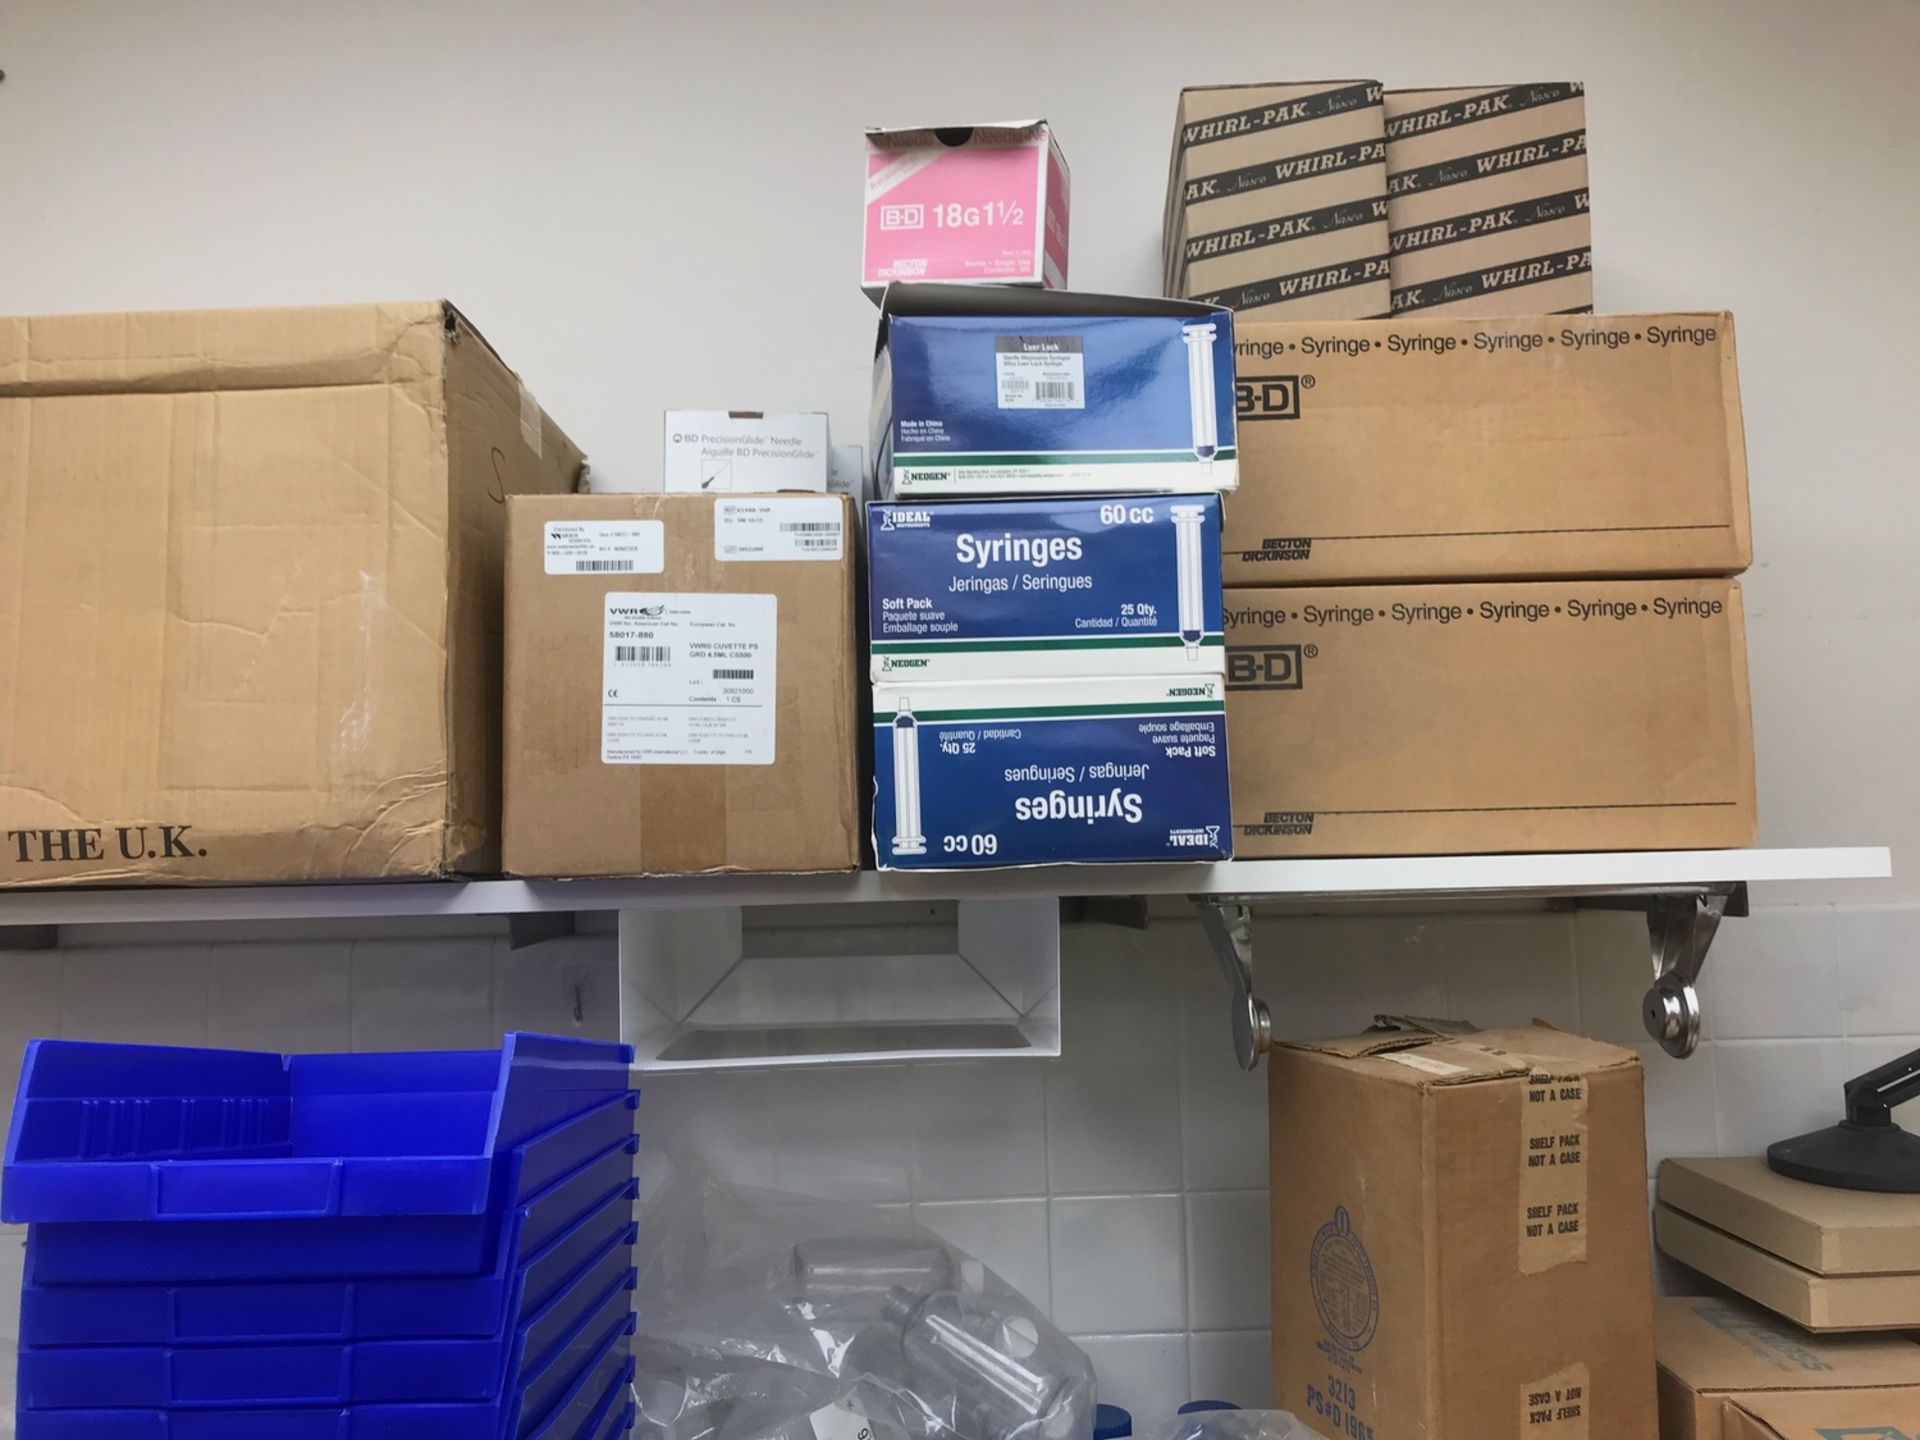 Lot of Lab Equipment, Syringes, Coolers, Rubber Gloves, Hair Nets, Ear Plugs and Bags (Cabinets - Image 7 of 7